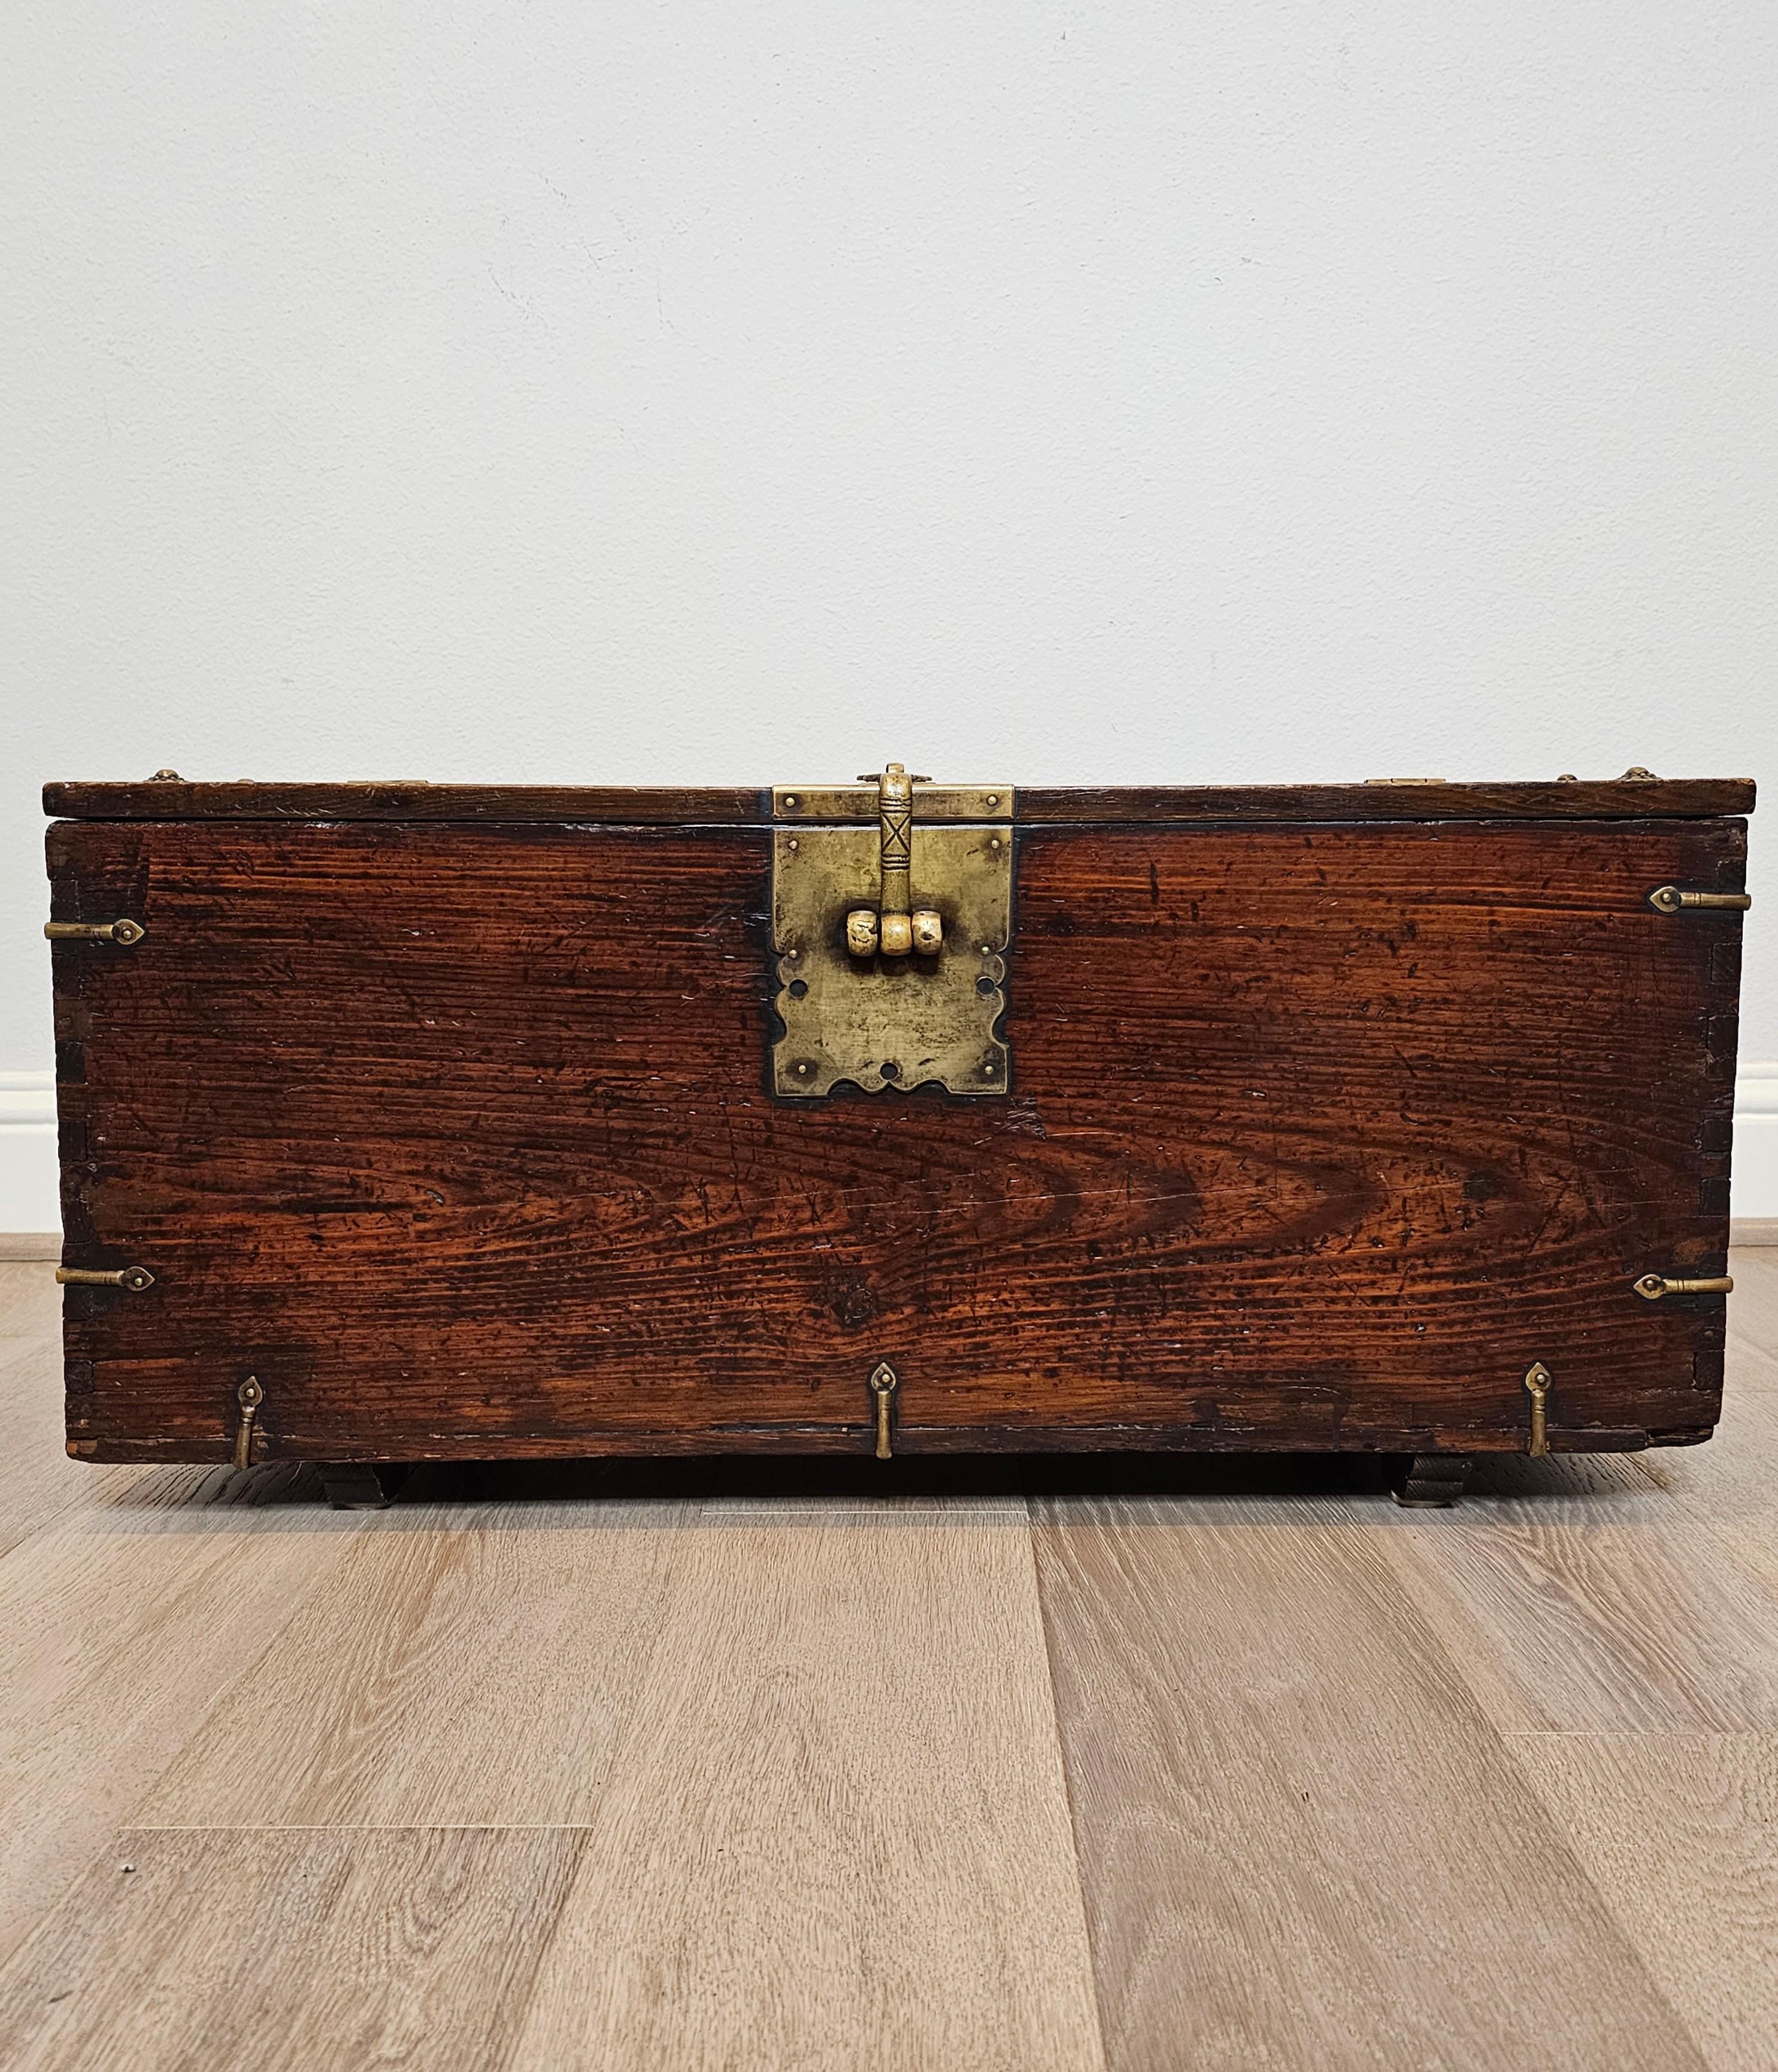 A charming antique Korean wooden money chest with beautifully aged warm rustic distressed patina. Rectangular hardwood case with exposed tongue and groove joinery, heavy brass hardware and decorative patinated brass strap supports, having a partial